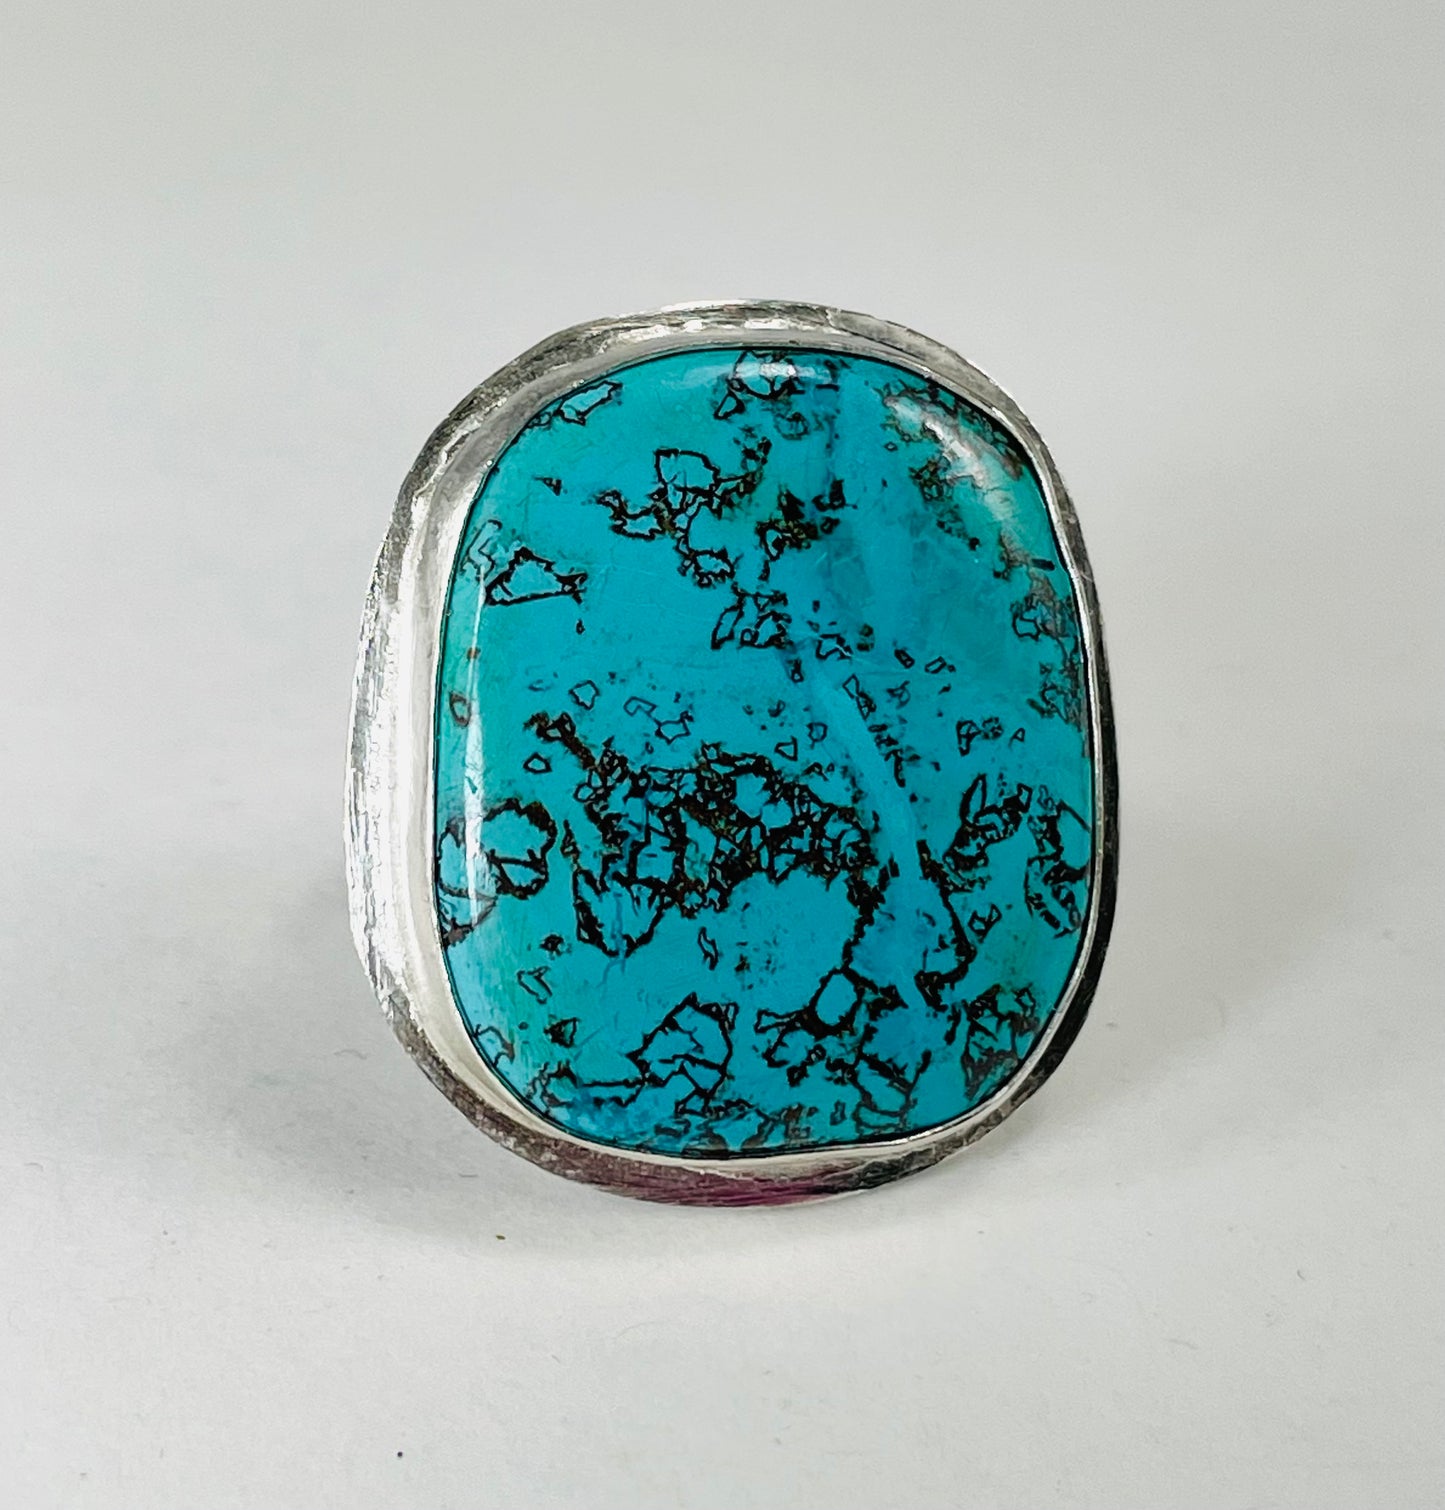 Turquoise ring in sterling silver